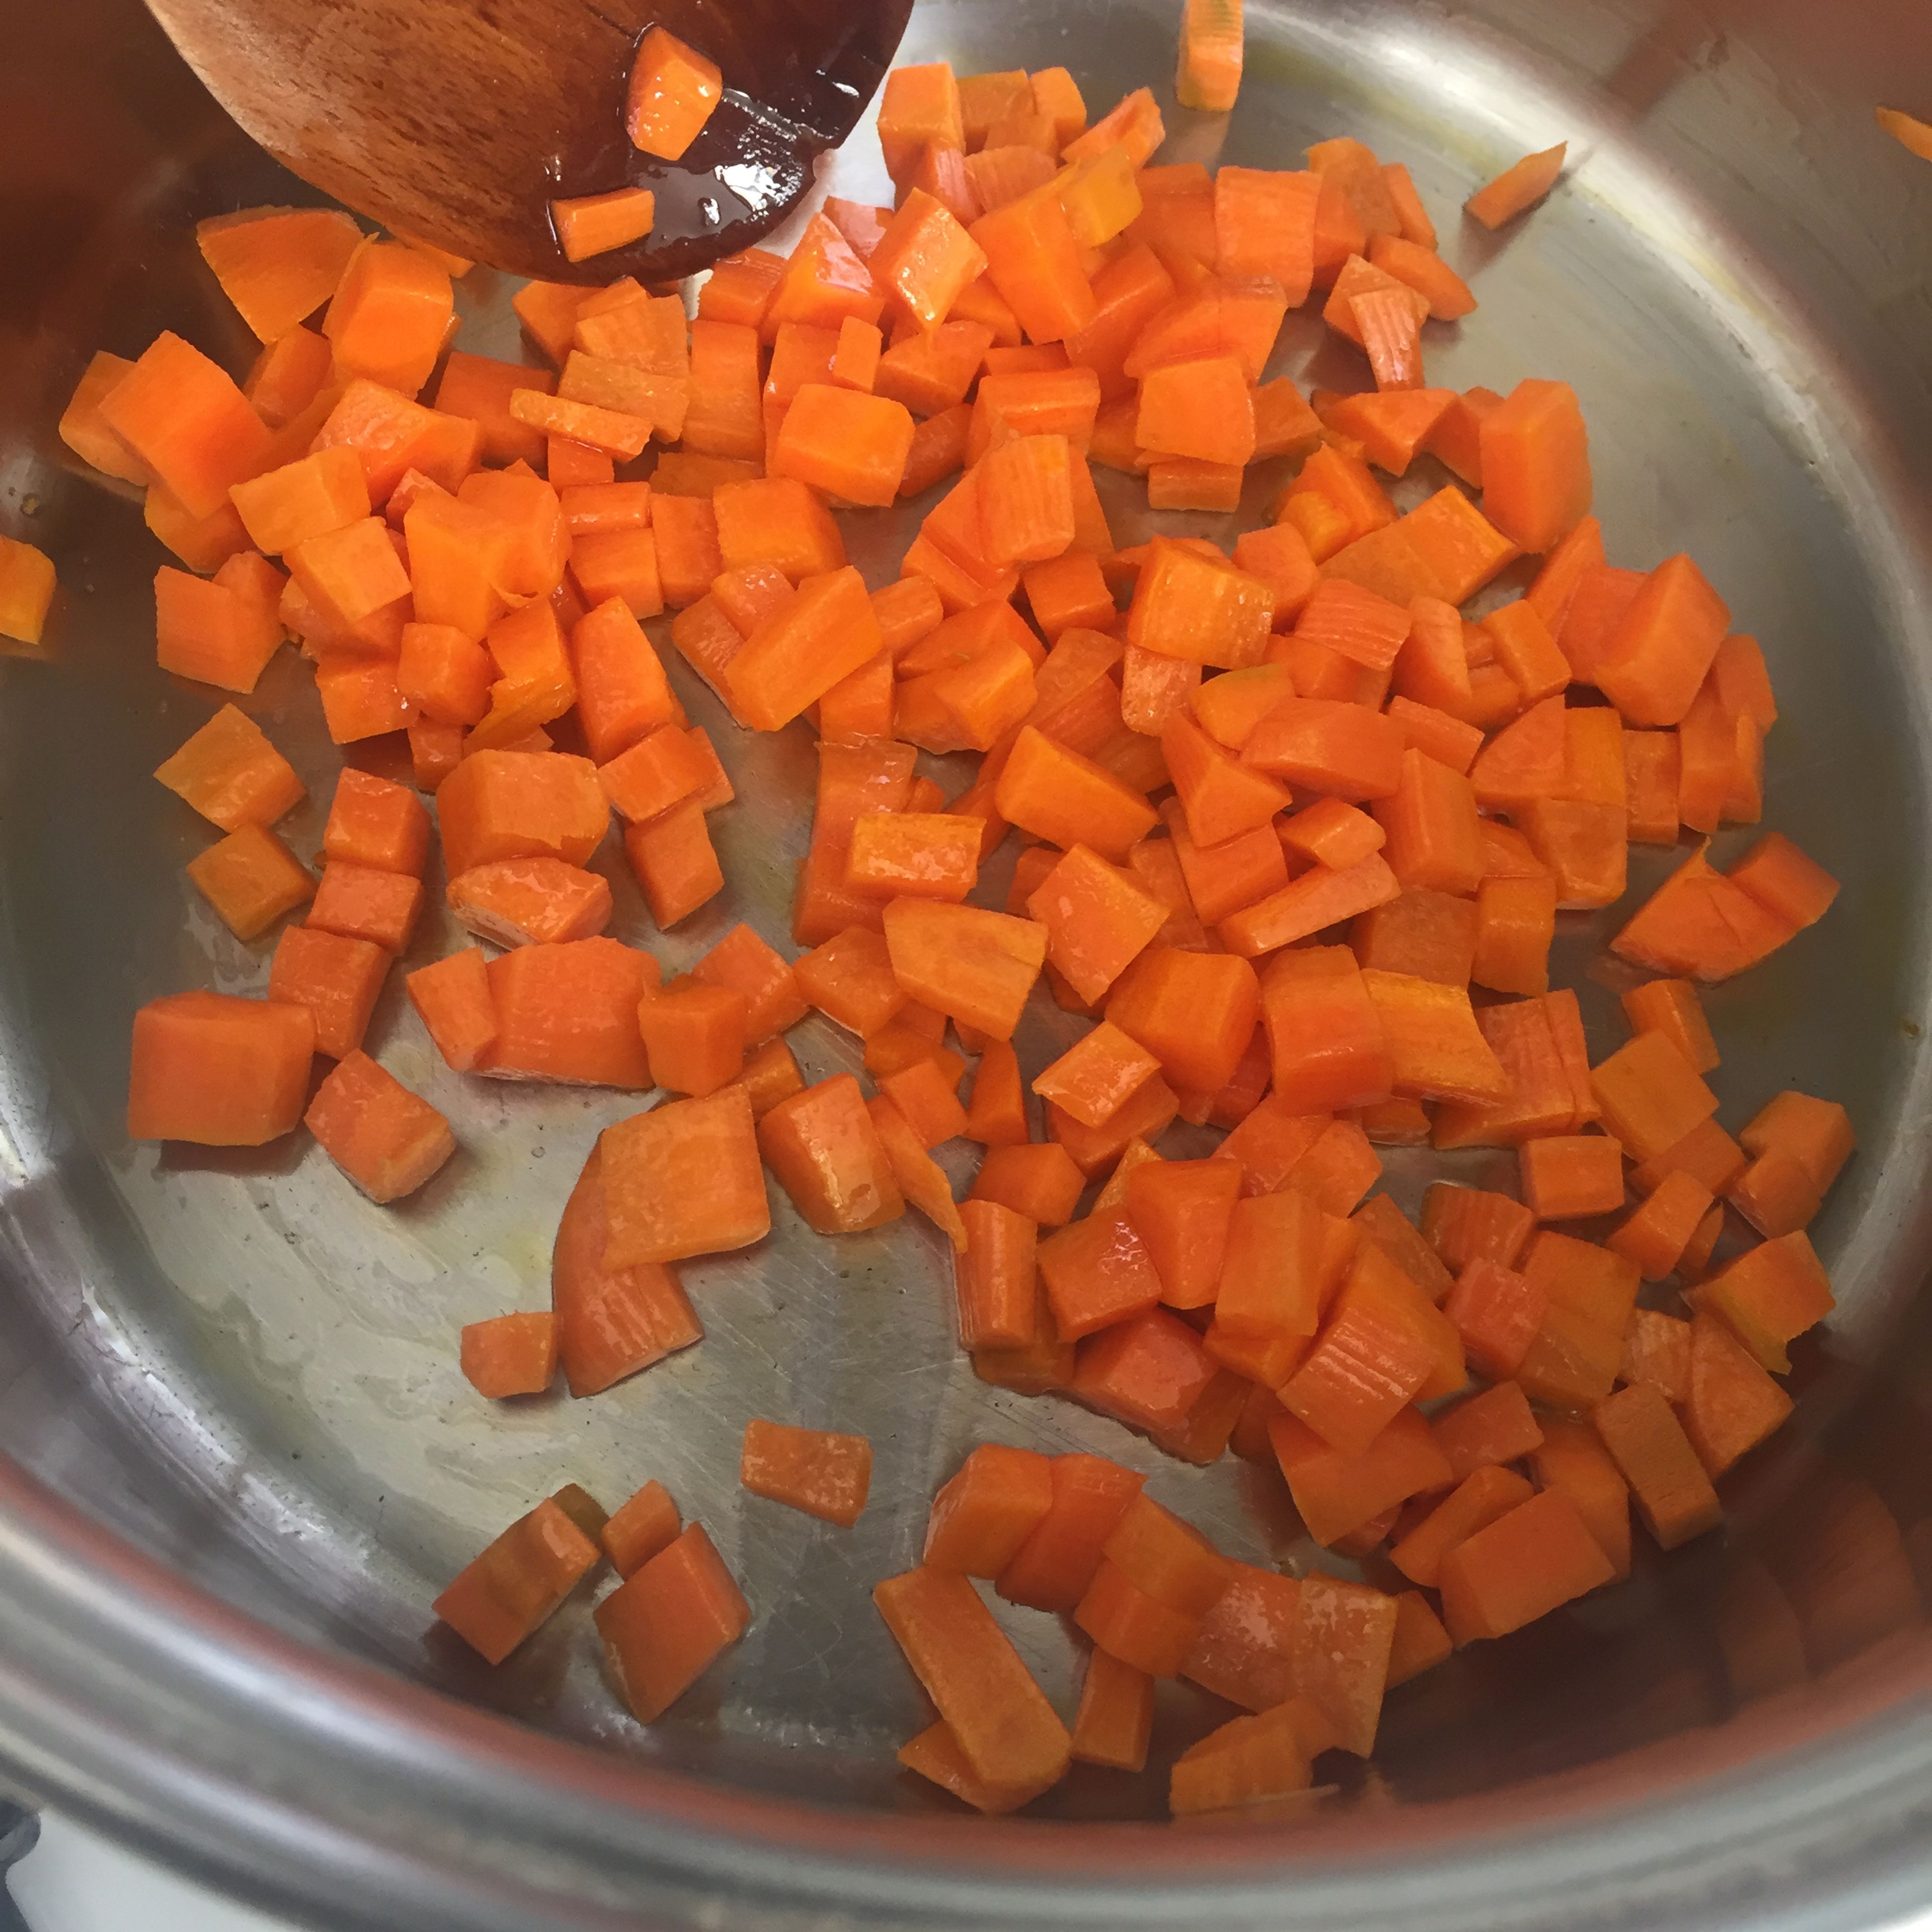 Stir to avoid sticking to the bottom, until the carrot is slightly cooked